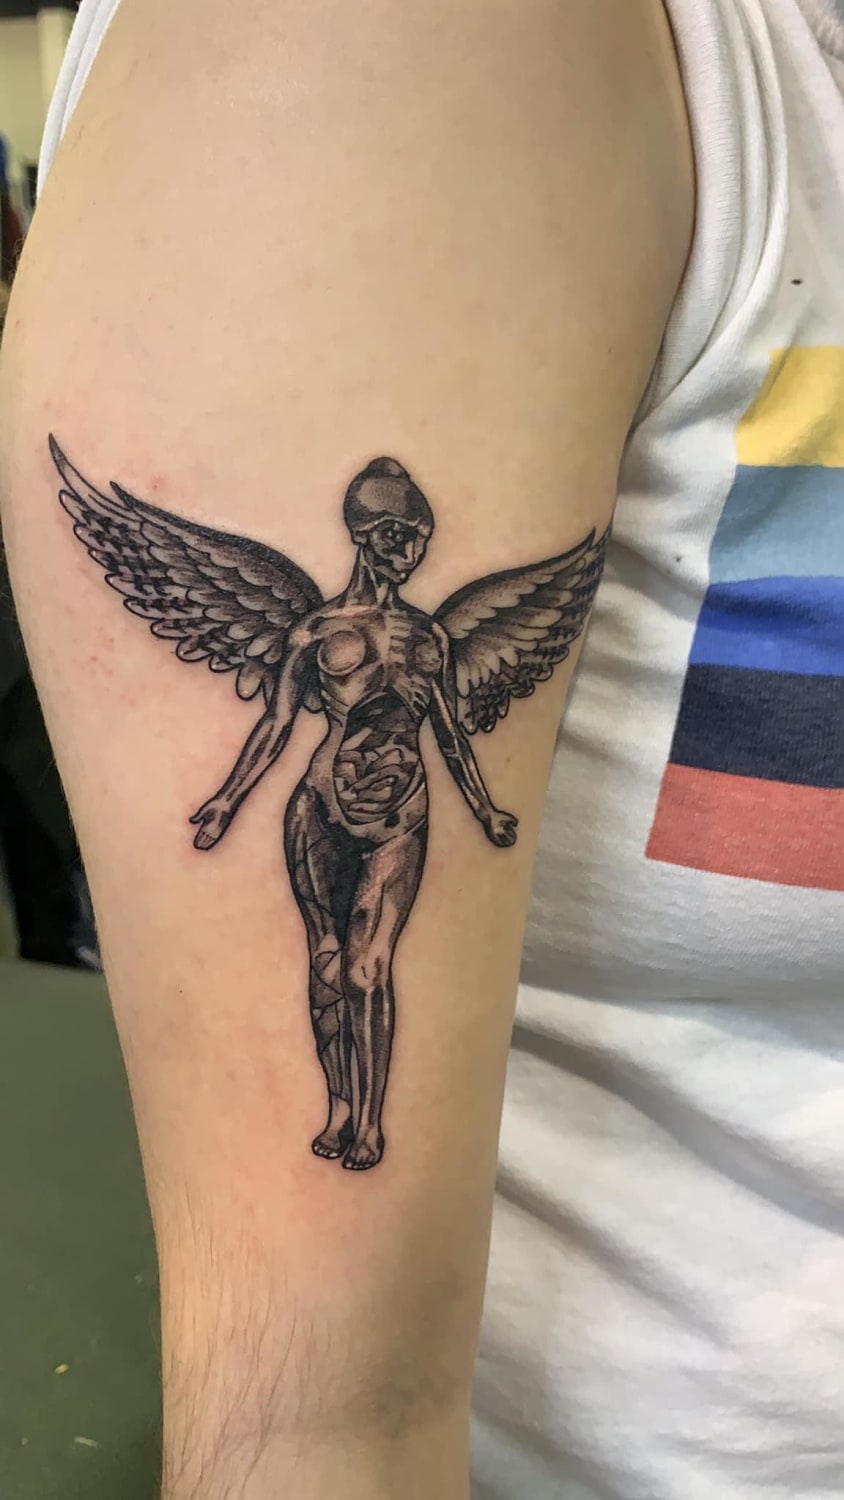 Nirvana tattoo done by Christian Massey at the Skin Museum in Milwaukee Wi